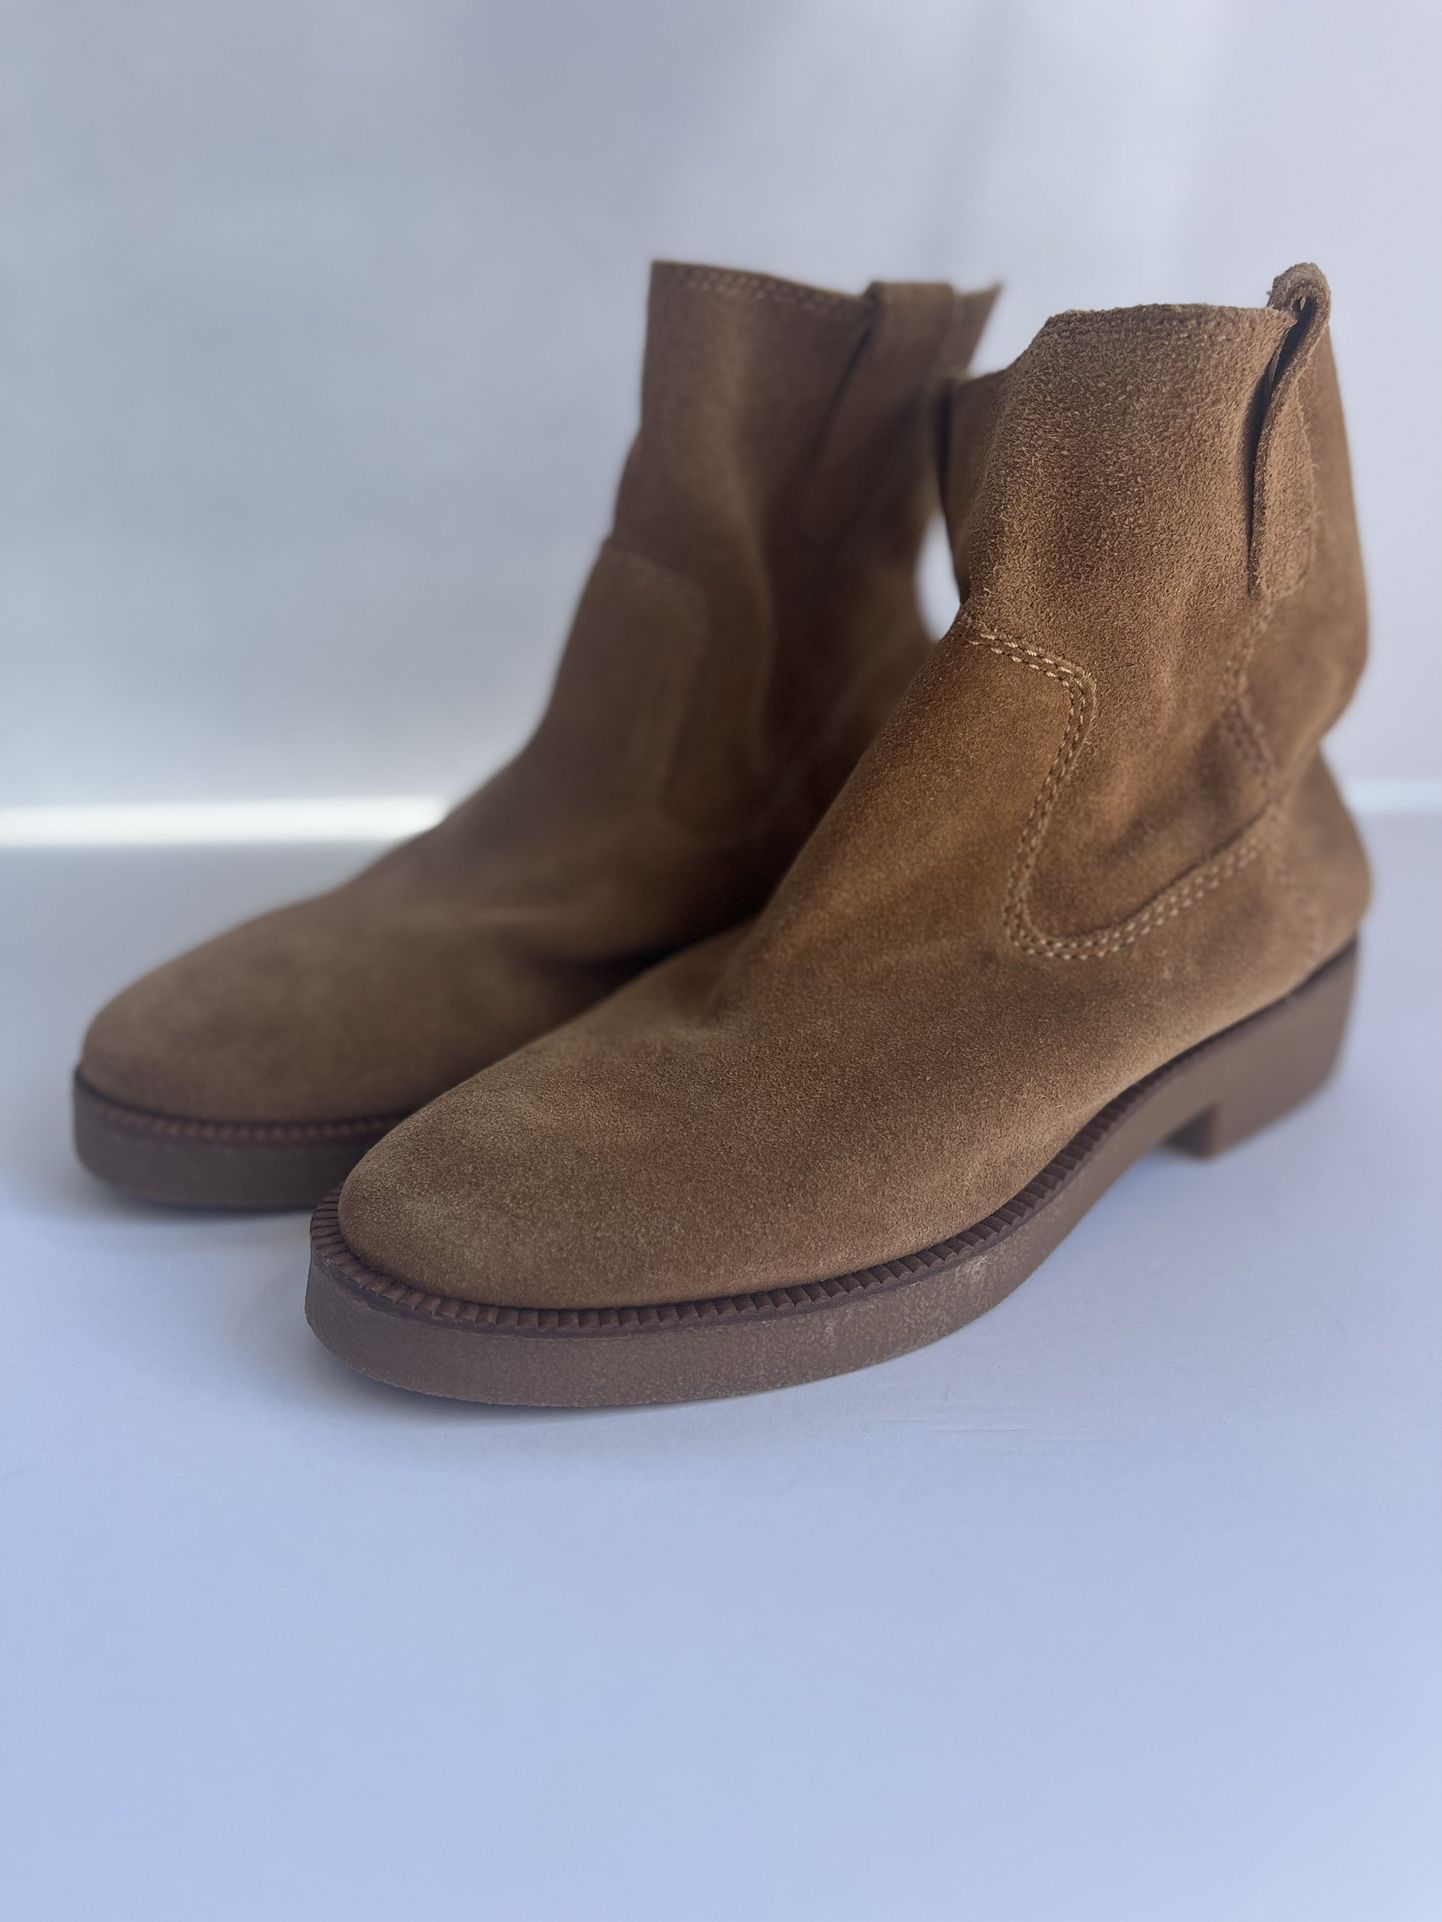 Lucky Brand Ankle Suede boots 6.5 Women’s Med Width